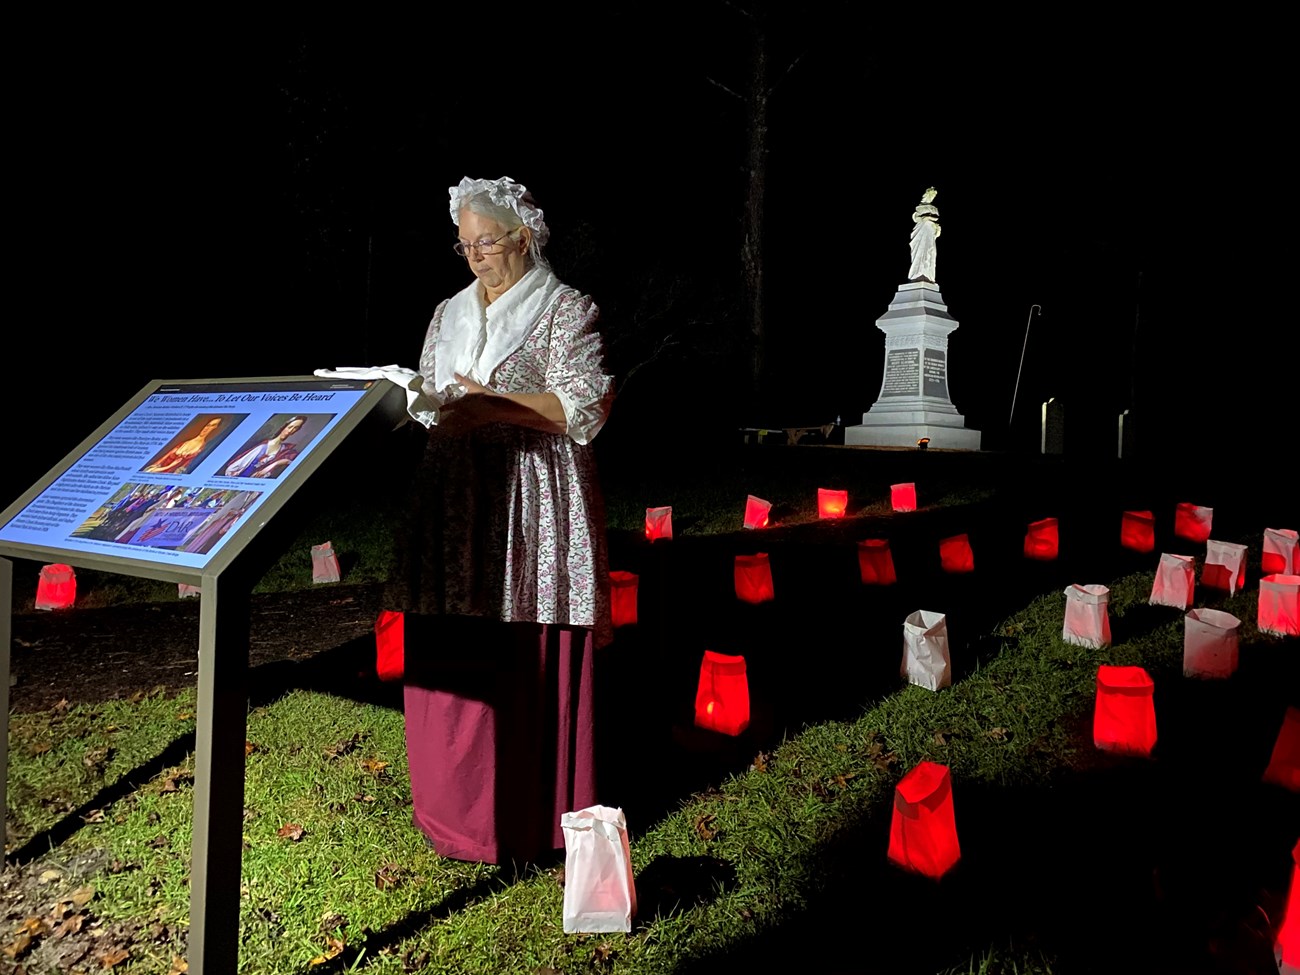 Woman standing next to wayside exhibit with red luminaries behind her at night. Monument lit up in the background.